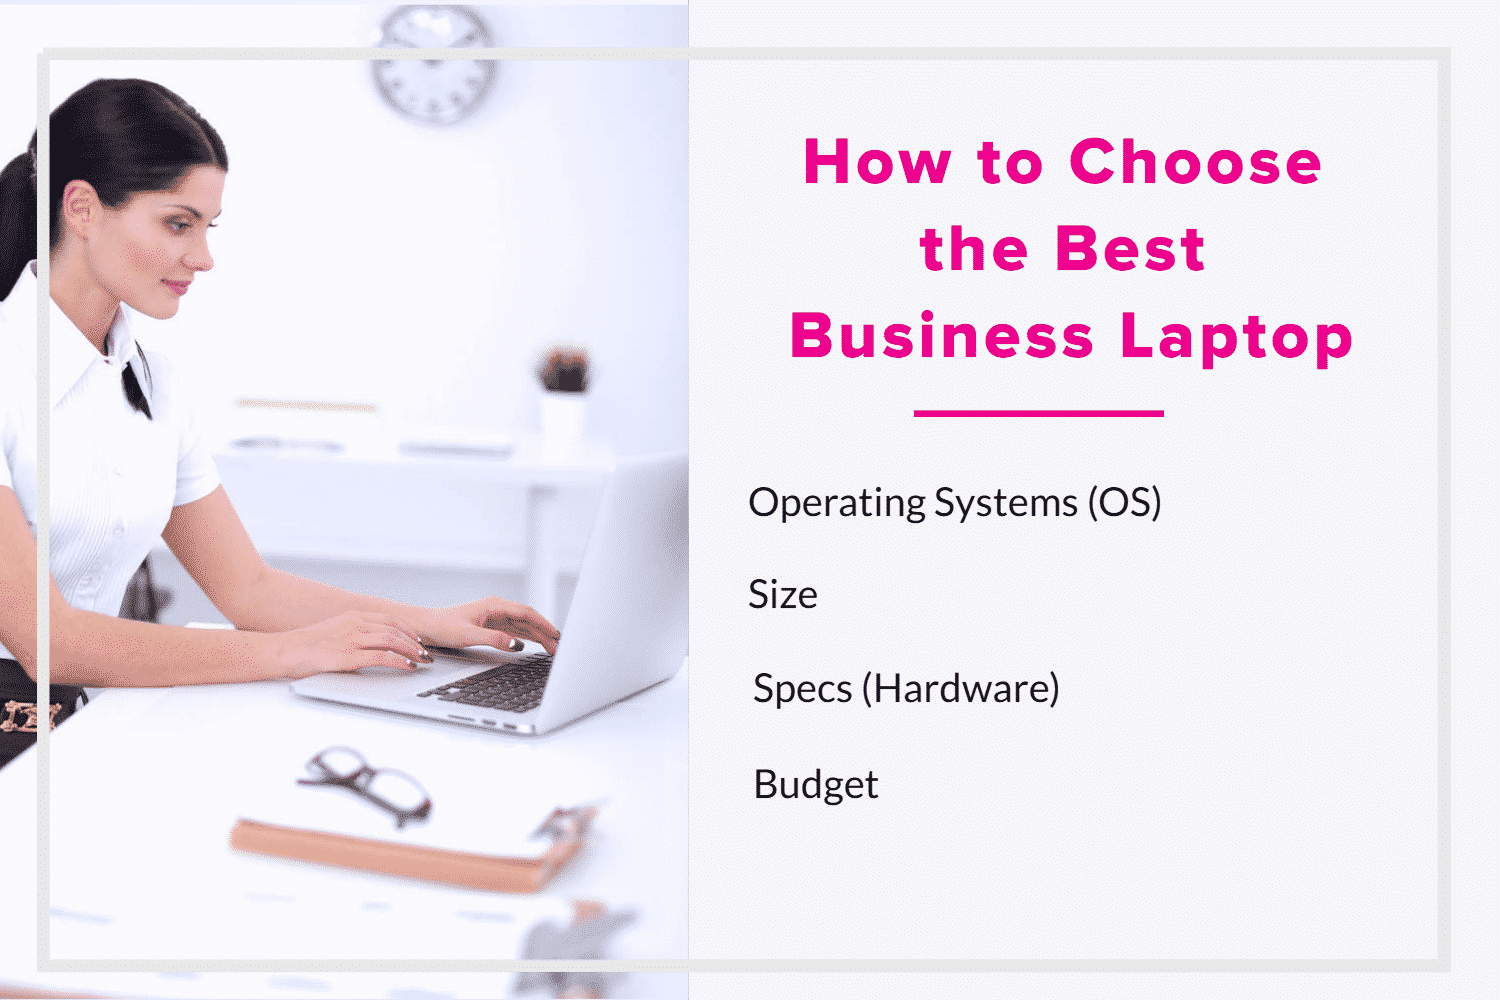 How to Choose the Best Business Laptop